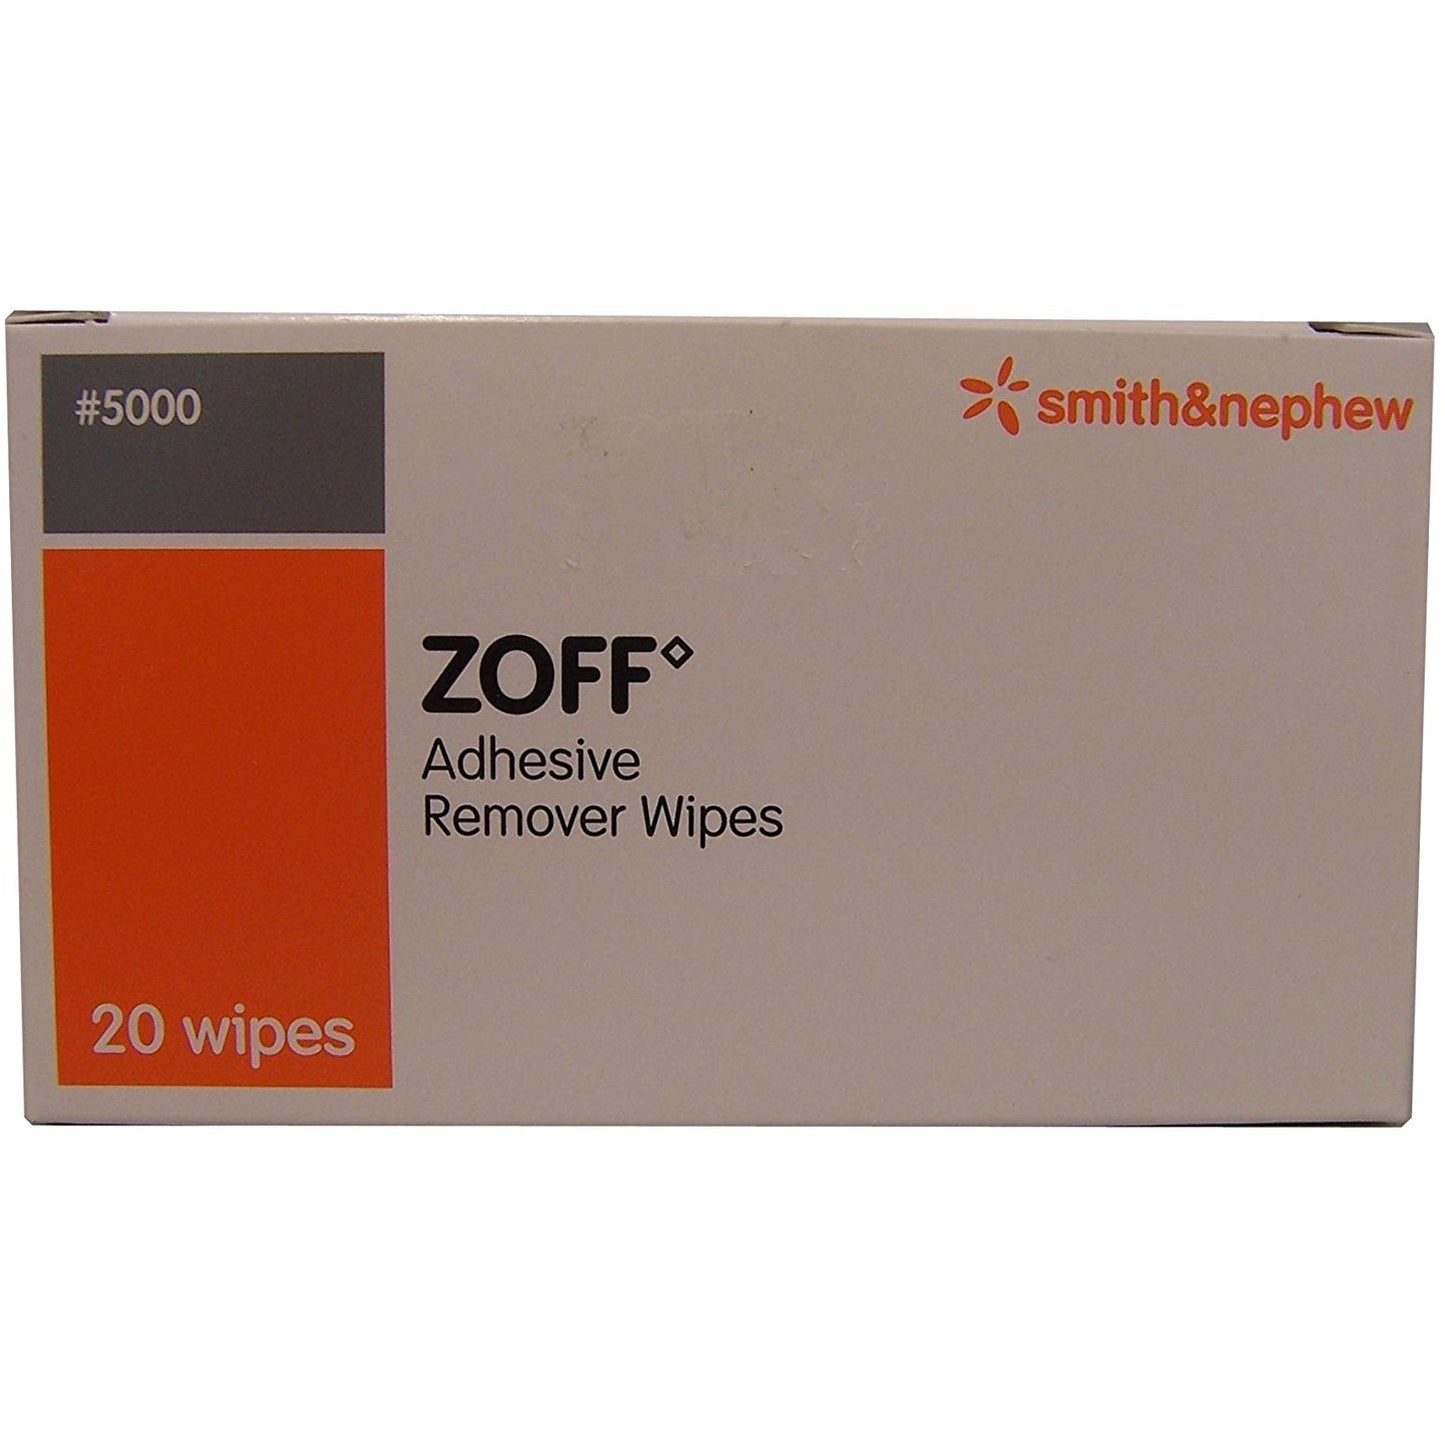 Zoff Adhesive Remover Wipes - Pack of 20